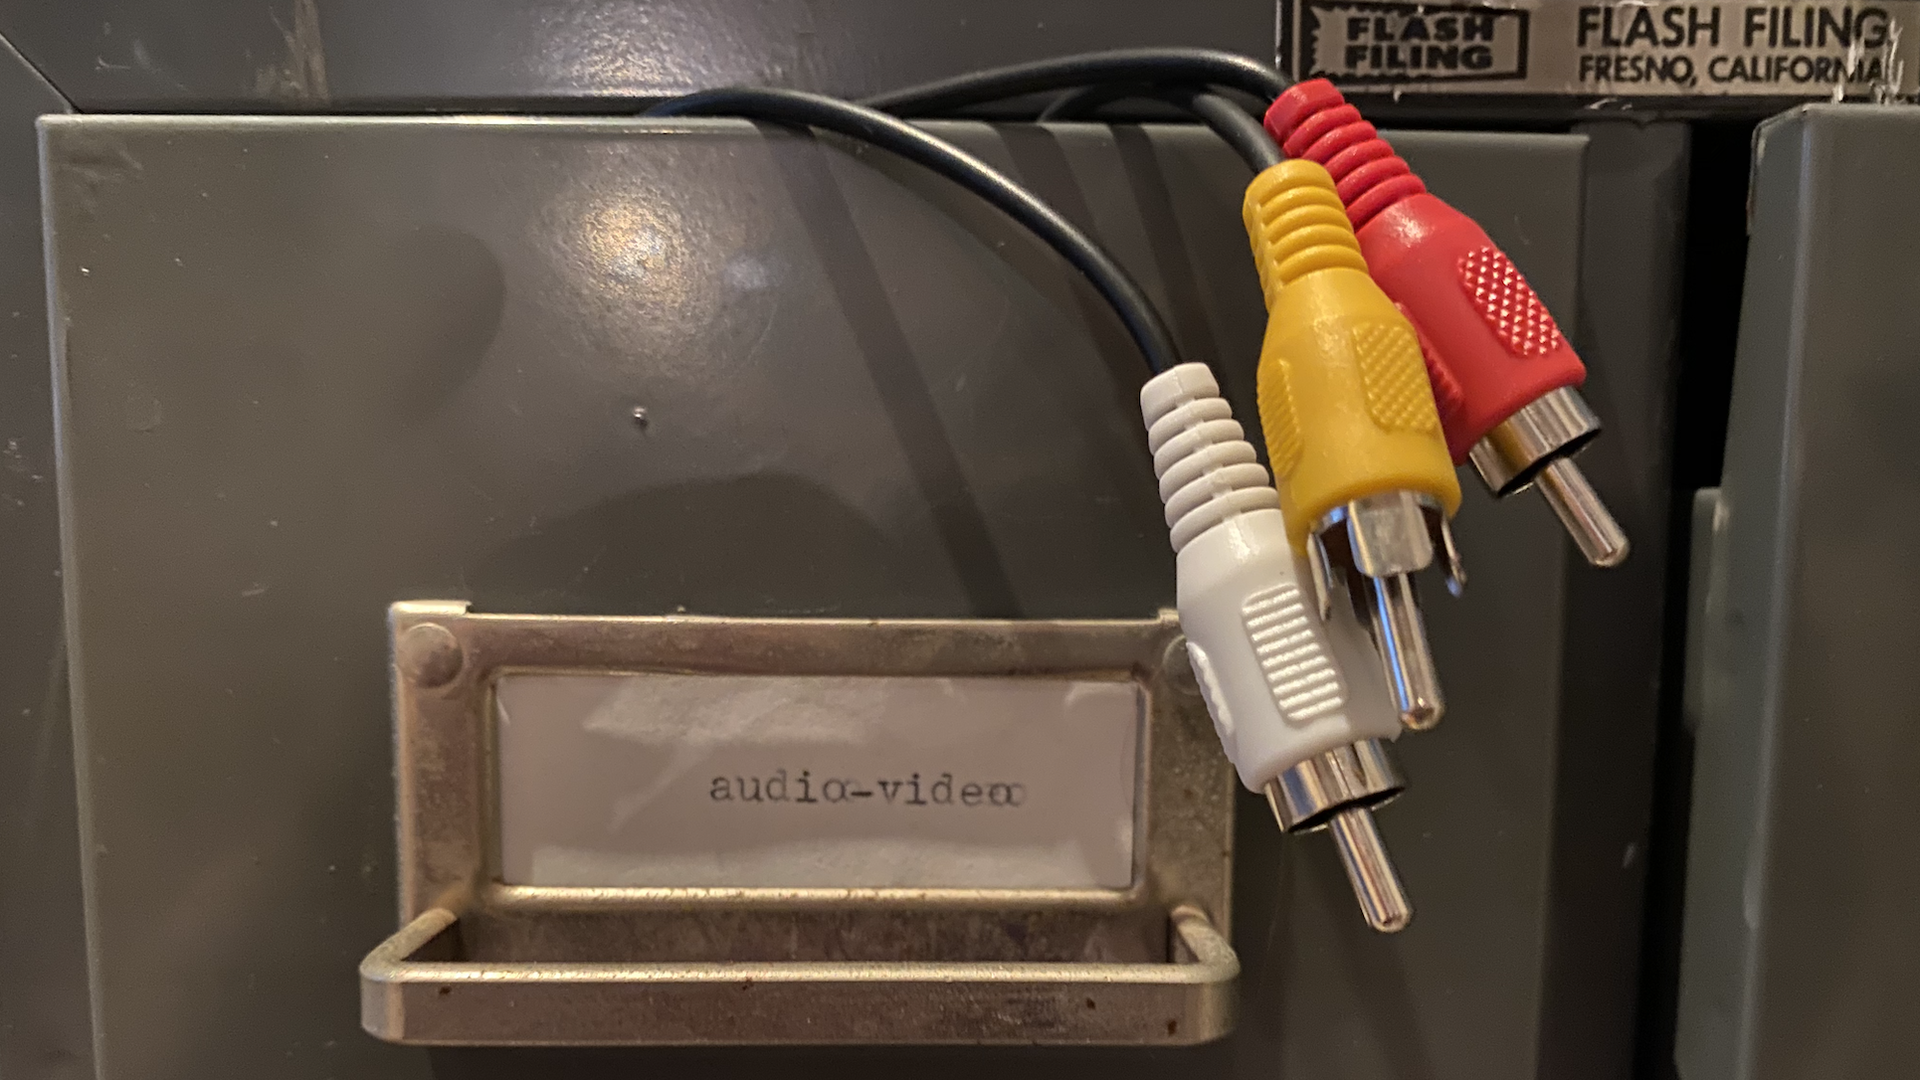 A "cord catalog" made up of an old card catalog with computer cords, including one labeled "audio/visual"